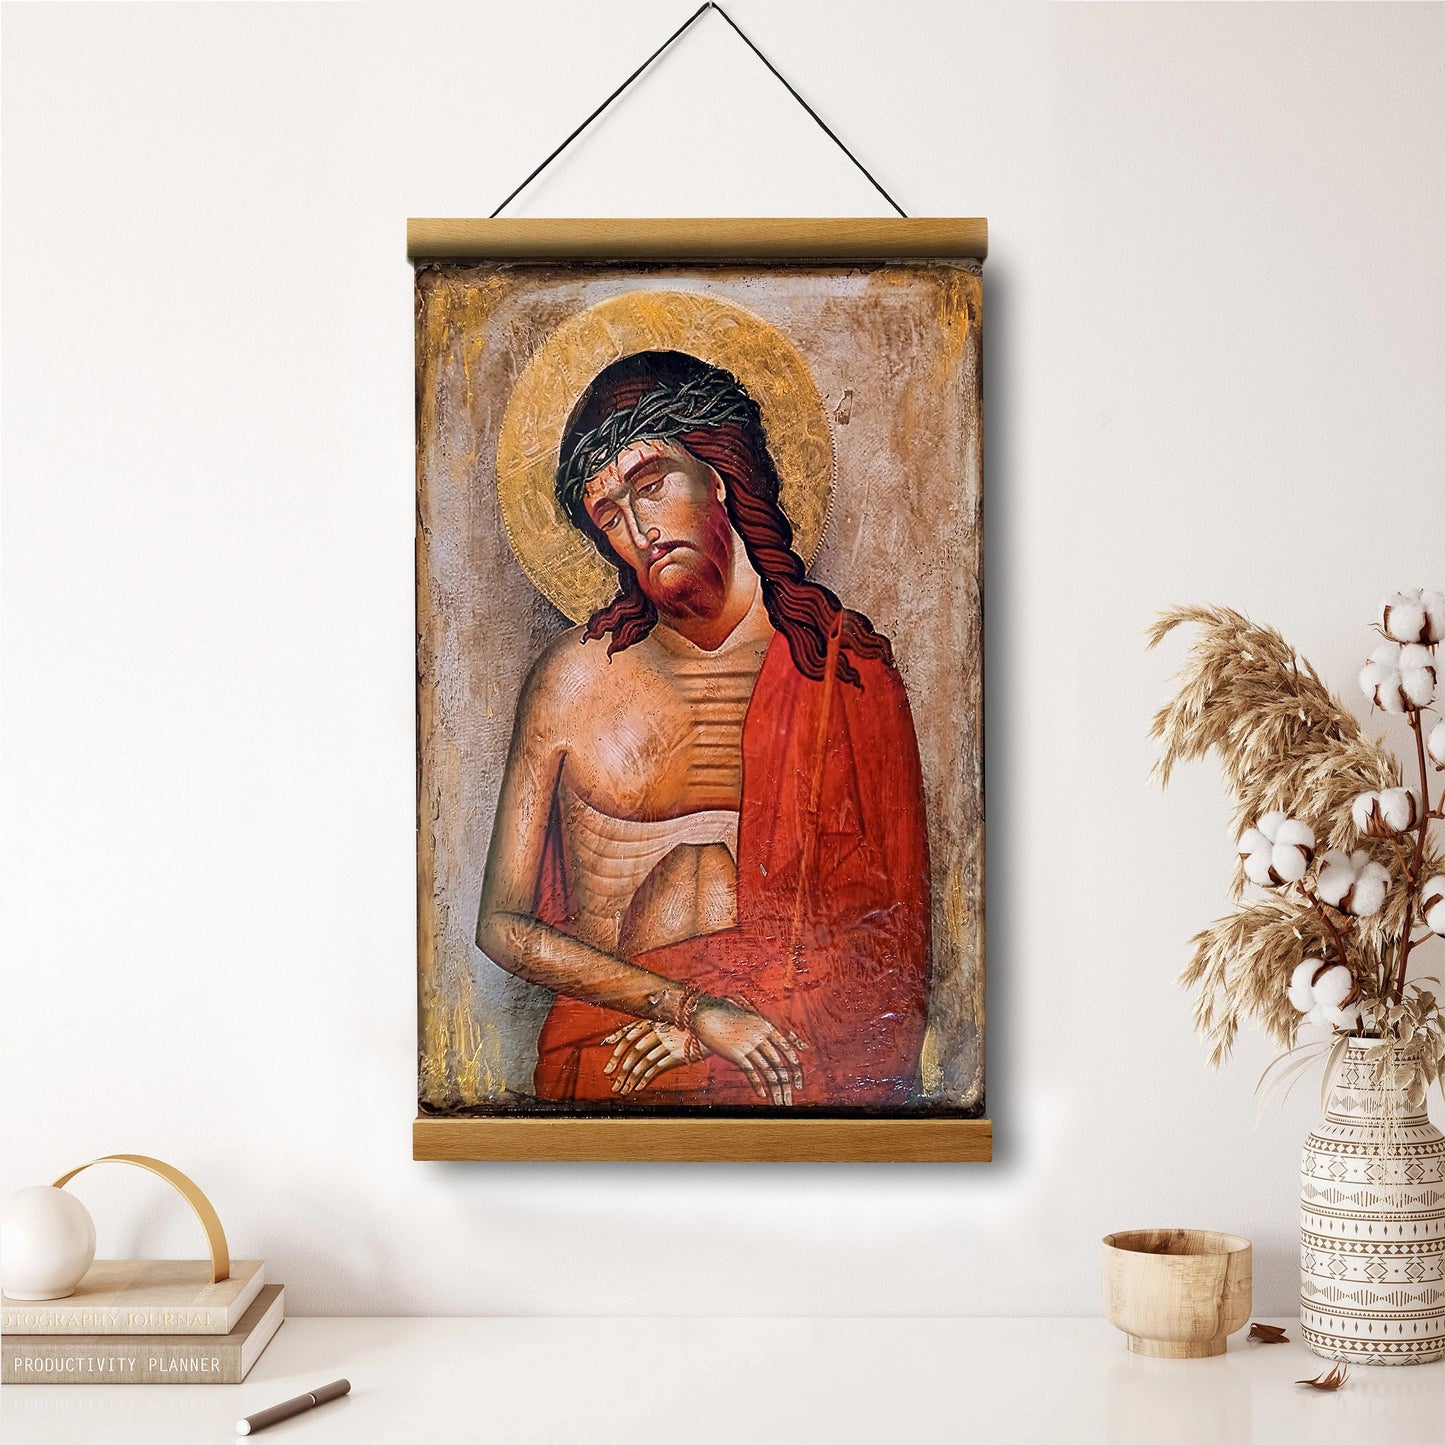 Jesus Christ After The Crucifixion Hanging Canvas Wall Art 1 - Jesus Portrait Picture - Religious Gift - Christian Wall Art Decor